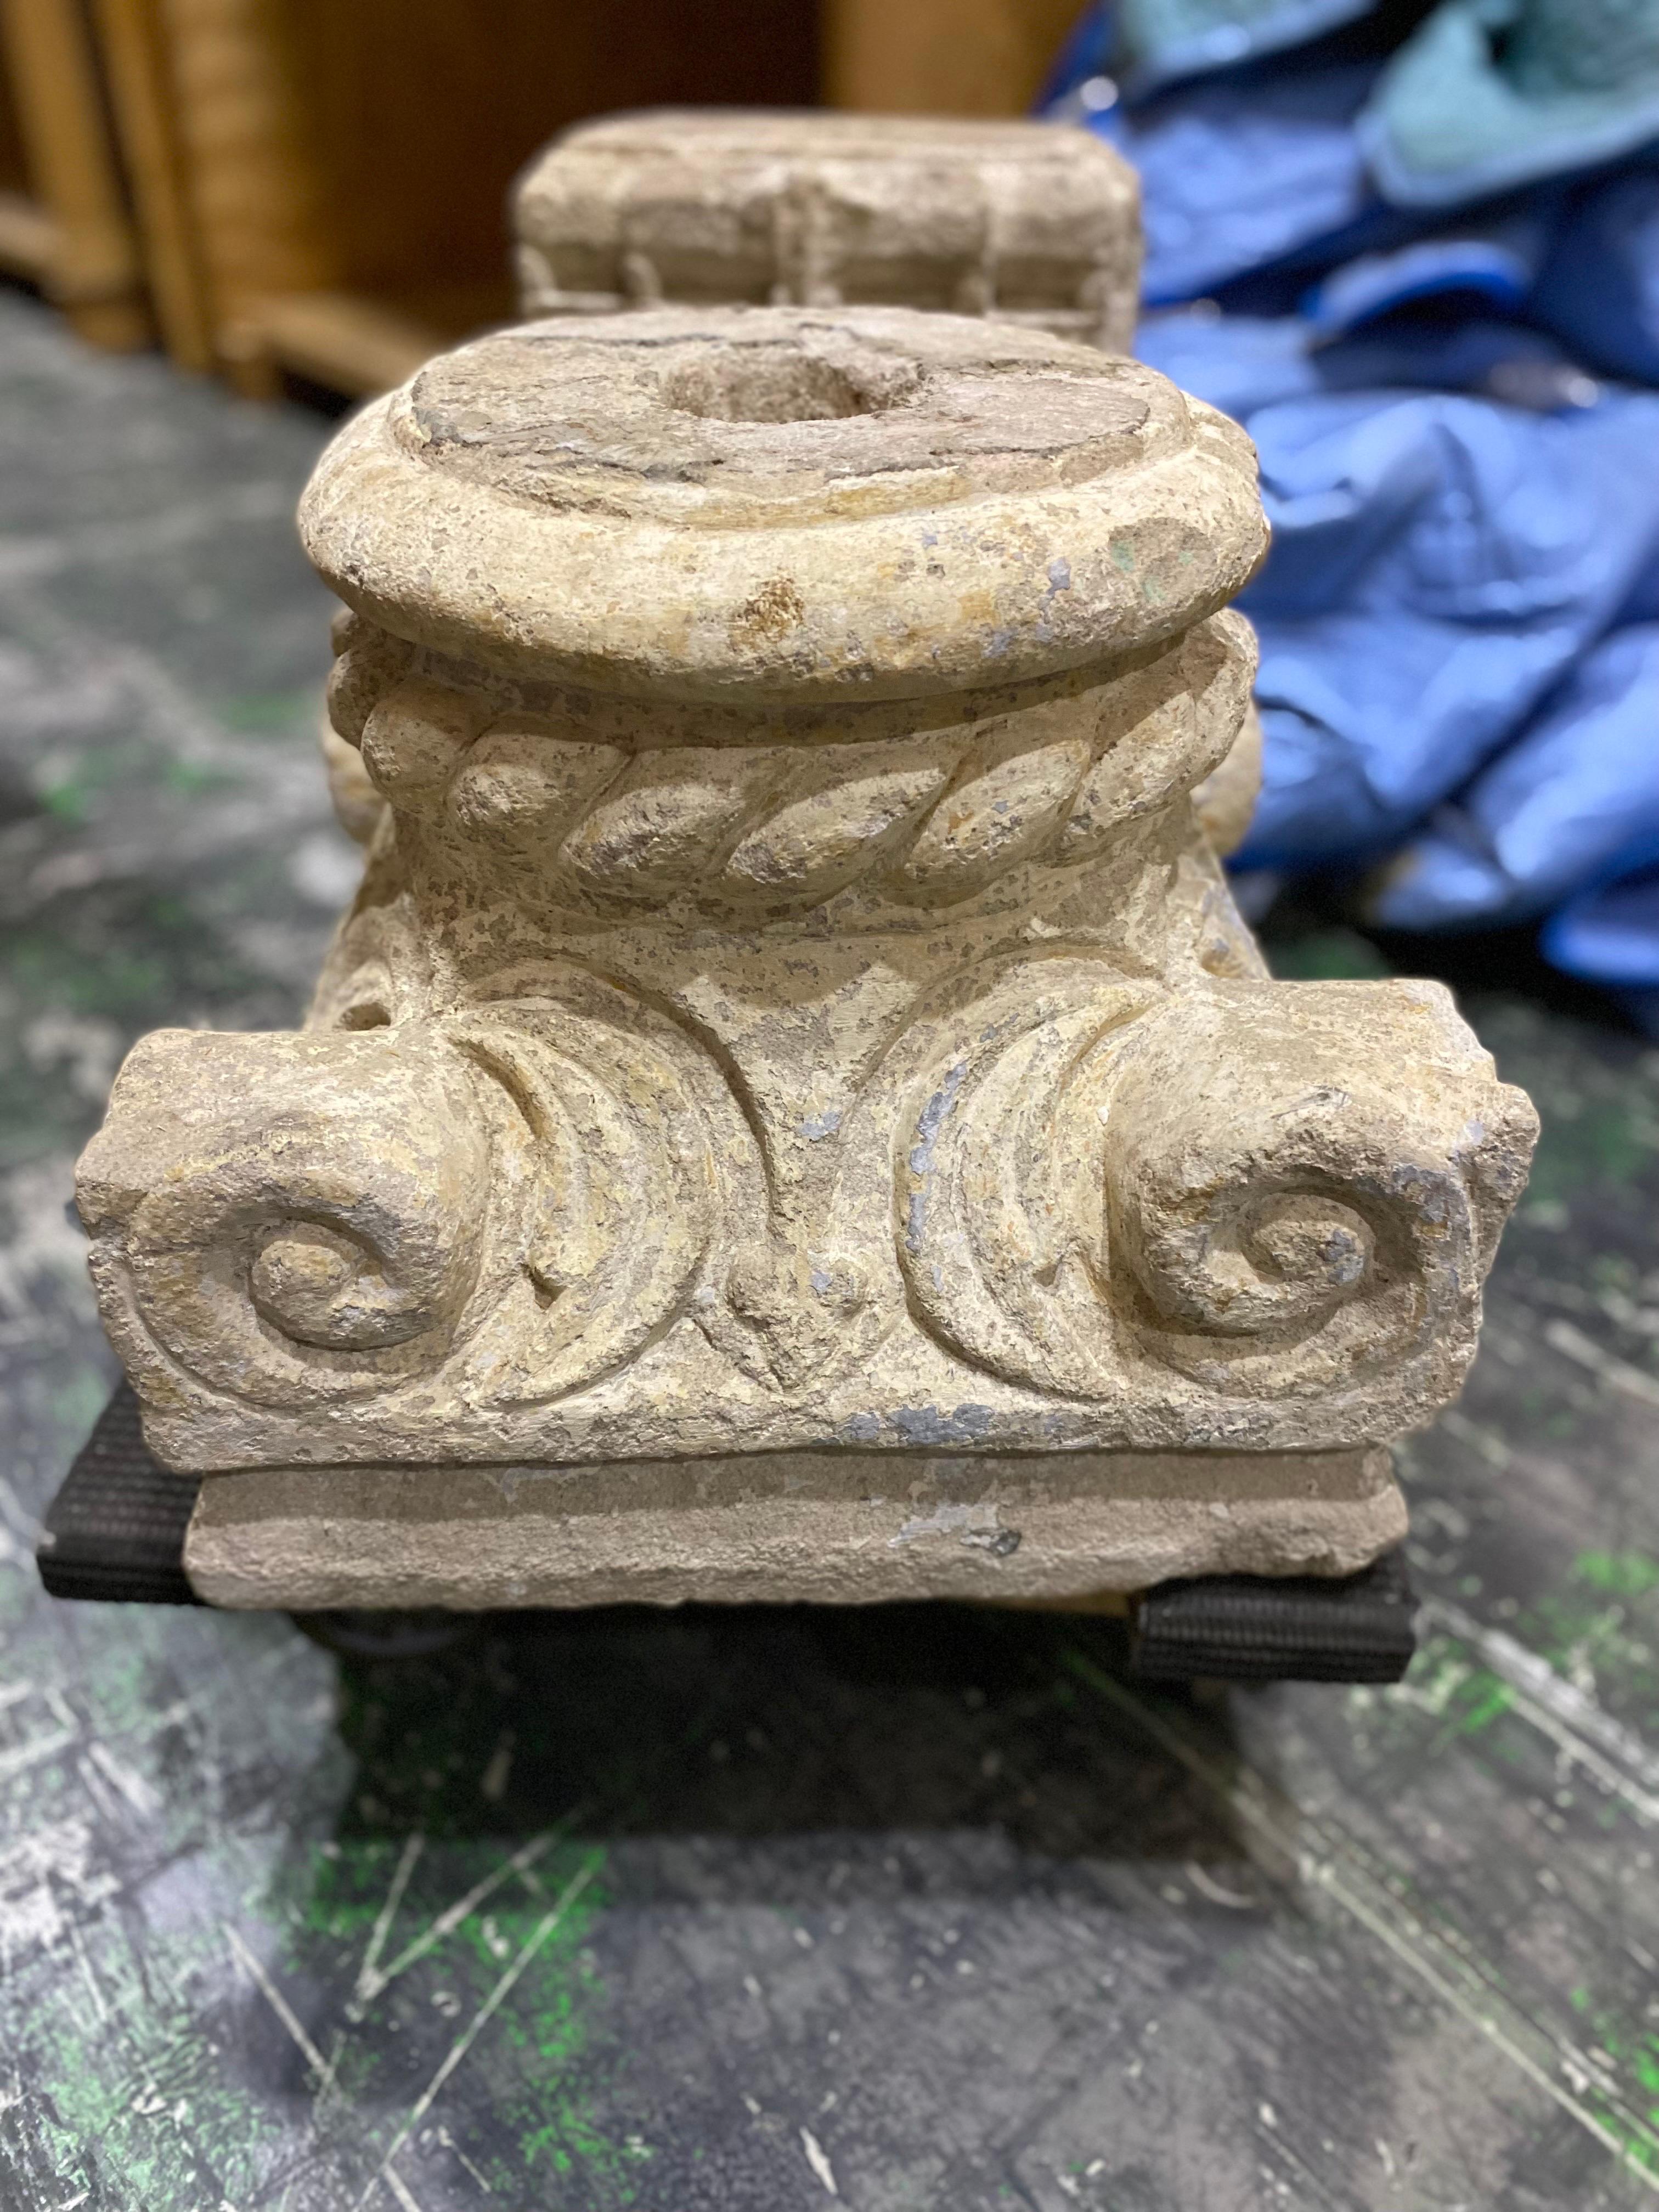 Architectural Ionic Stone Fragment, Early 20th Century
Probably 100 years old or so. A beautiful decorative piece can be used to put plants on, candles, sculpture or another creative use. Too heavy to ship in a box.

15